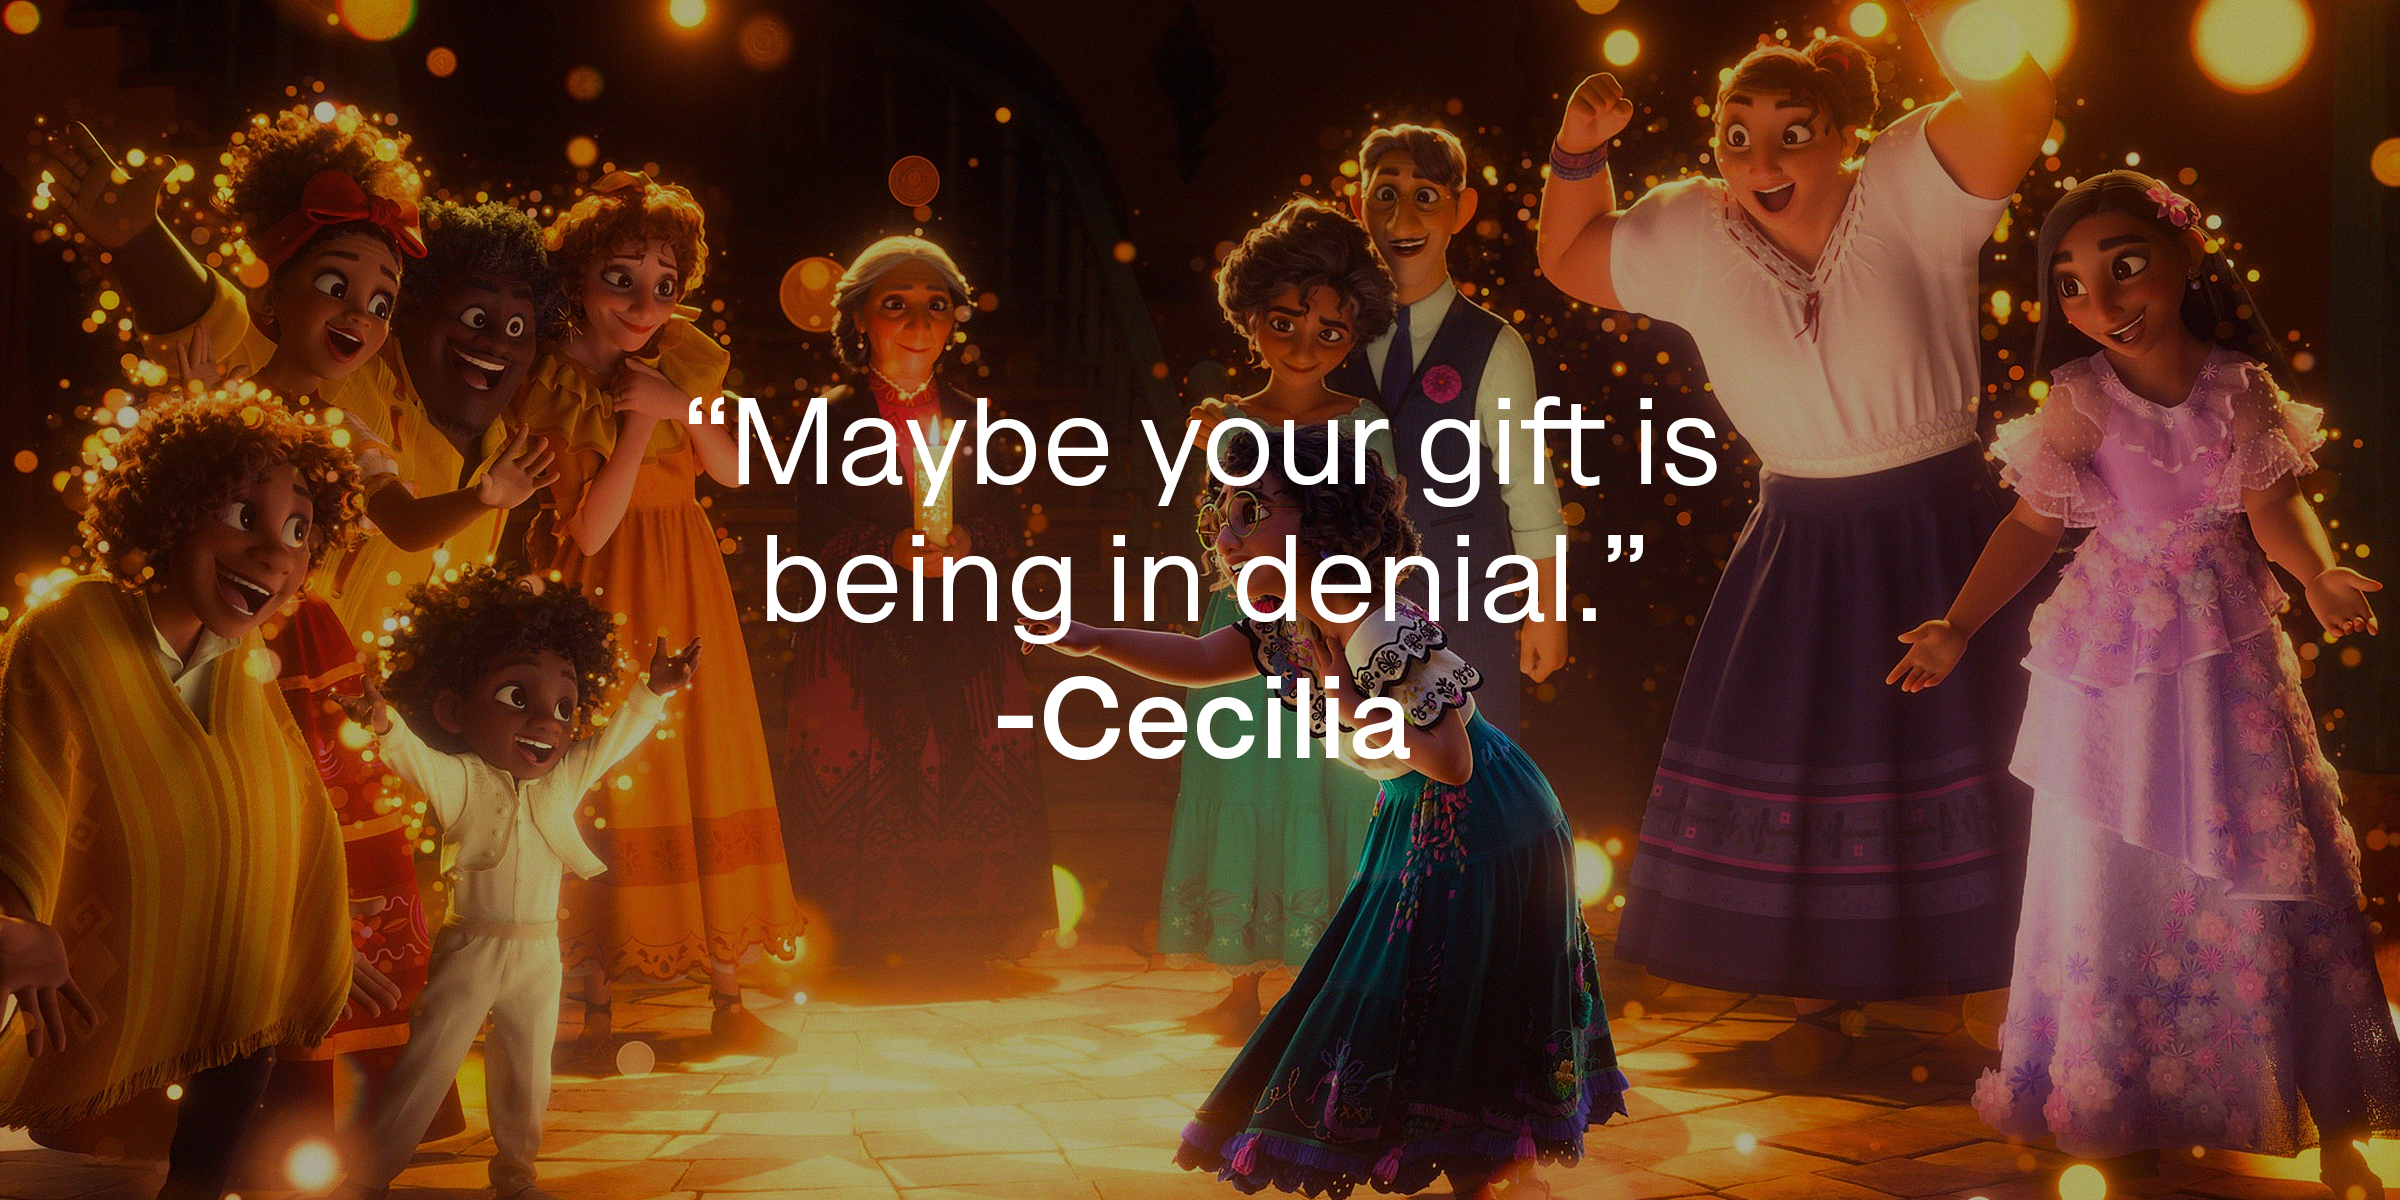 Cecilia's quote: "Maybe your gift is being in denial." | Source: facebook.com/EncantoMovie